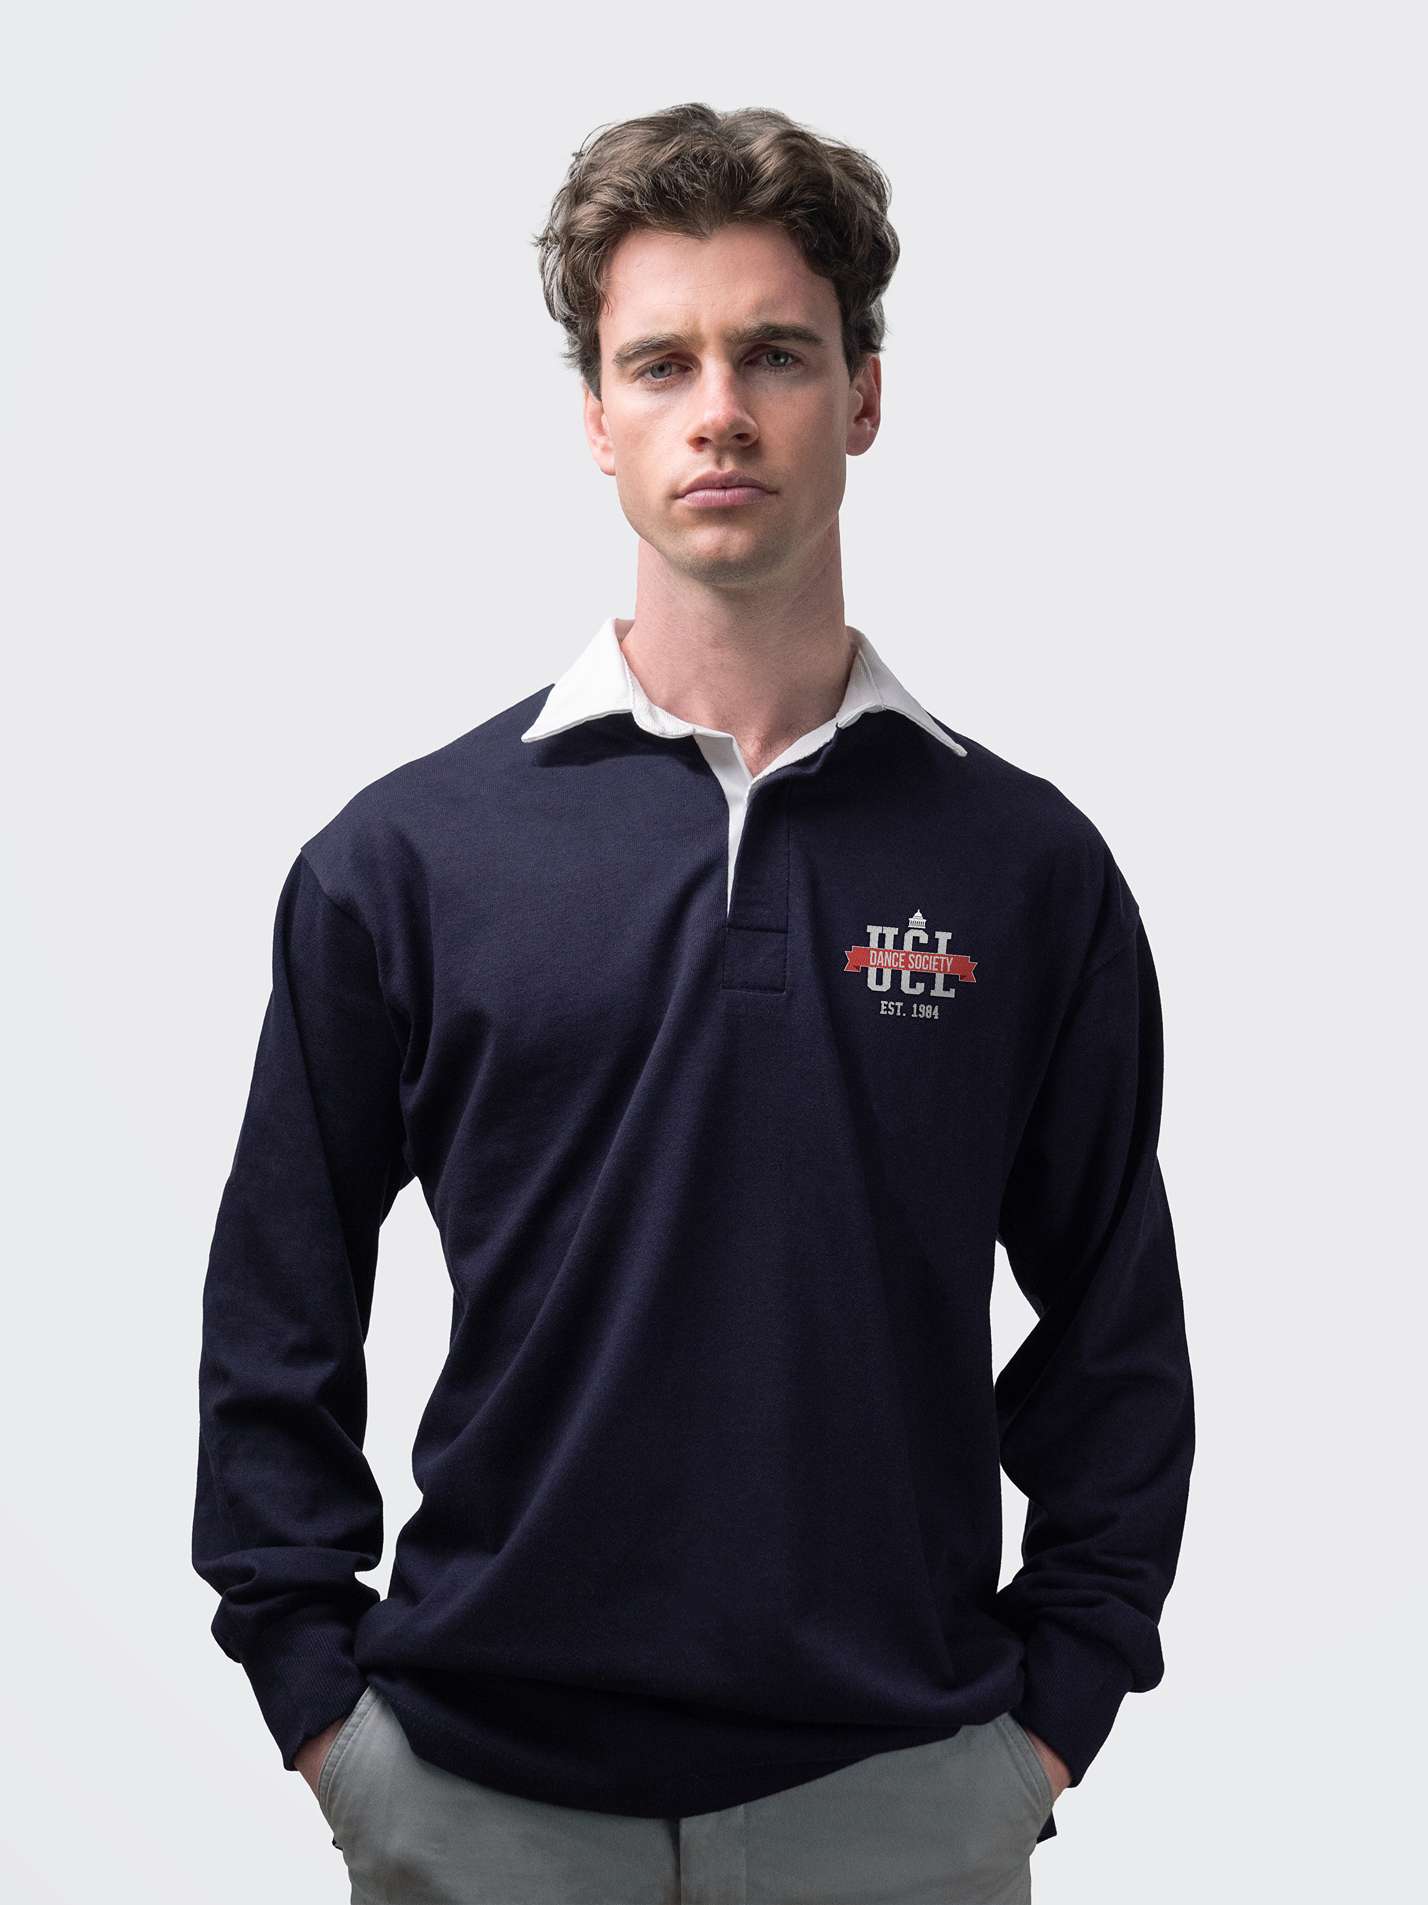 UCL Dance Society Competition Team Classic Men's Rugby Shirt